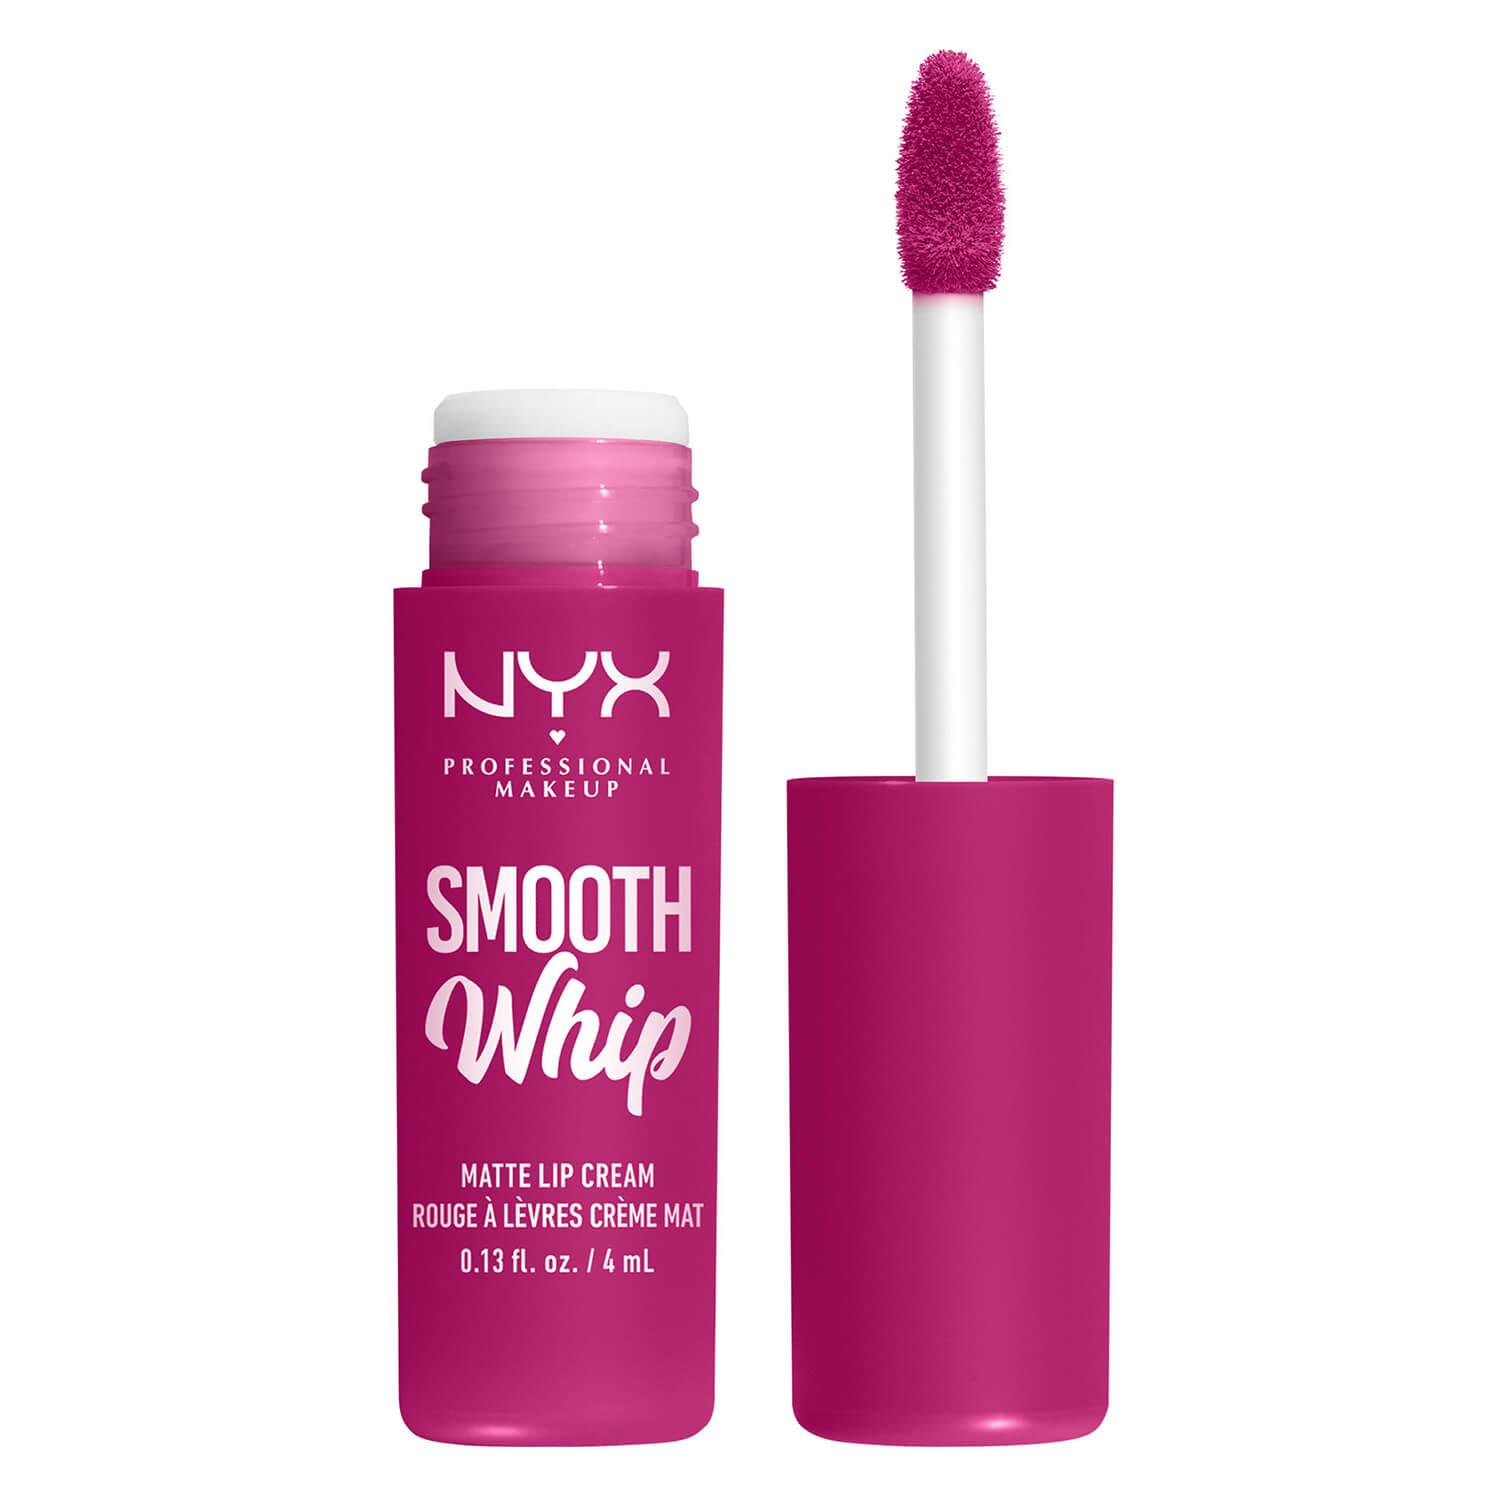 Smooth Whip Matte Lip Cream - Bday Frosting